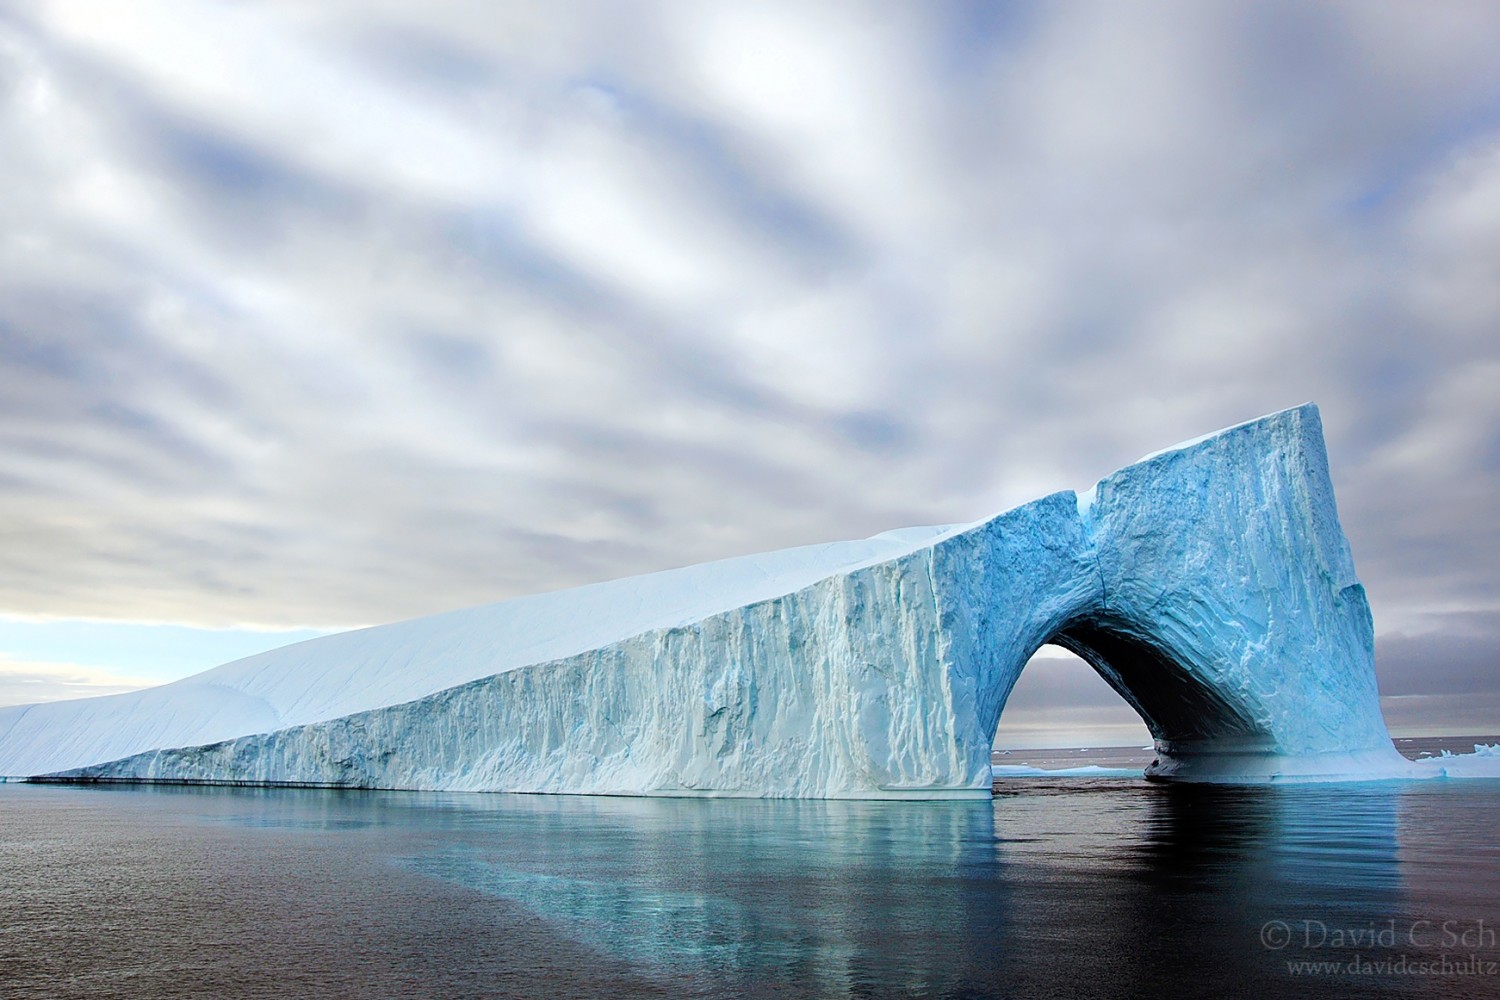 Tips For Photographing Ice, From Icebergs To Landscapes